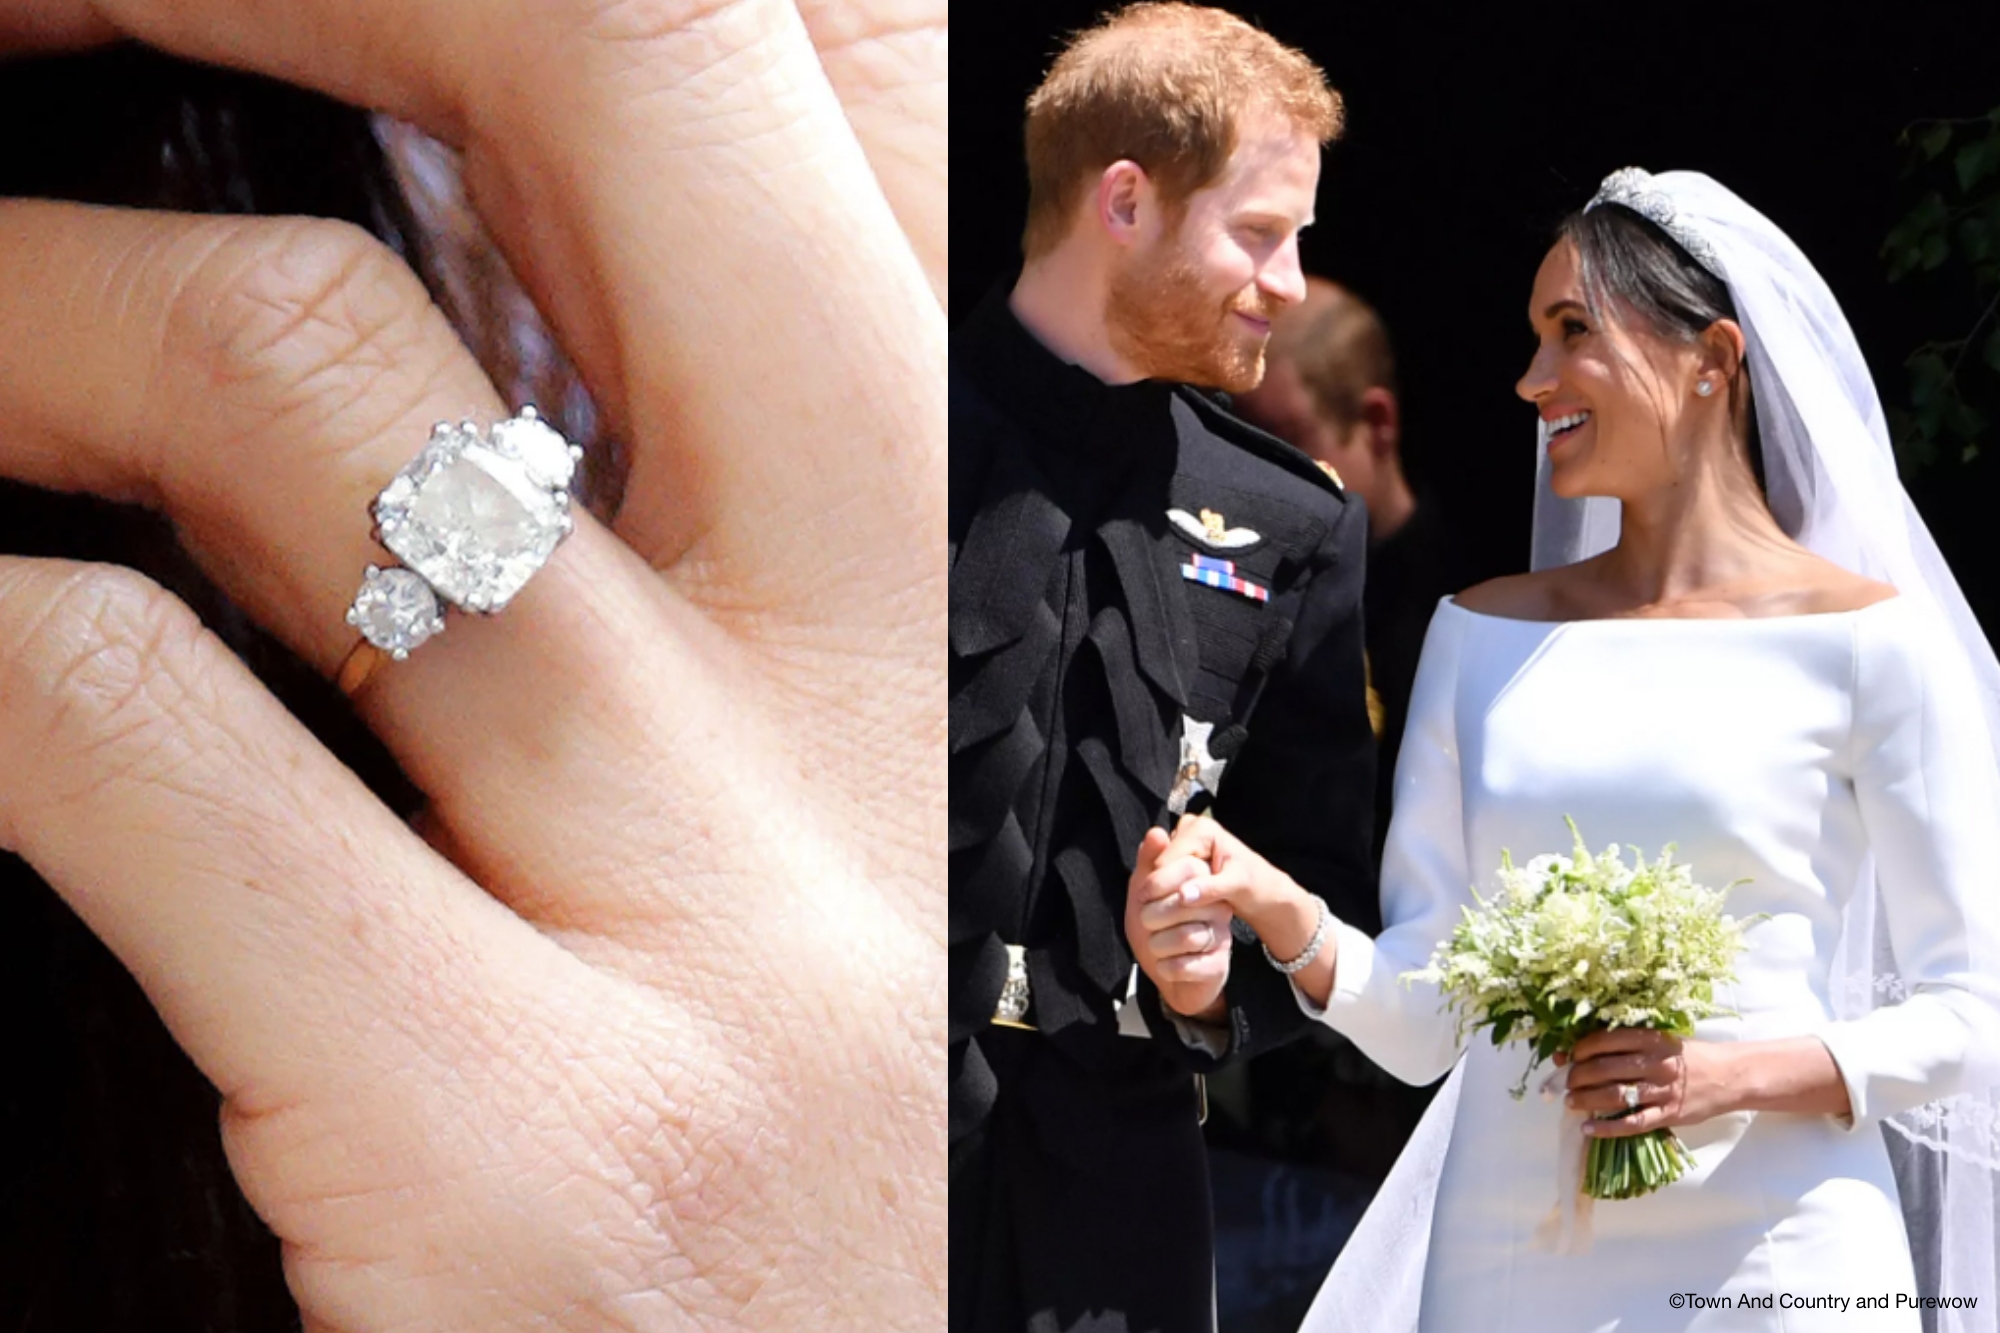 Meghan Markle's Engagement Rings: We're Comparing Her Two Rocks! | Meghan  markle engagement ring, Royal engagement rings, Meghan markle engagement